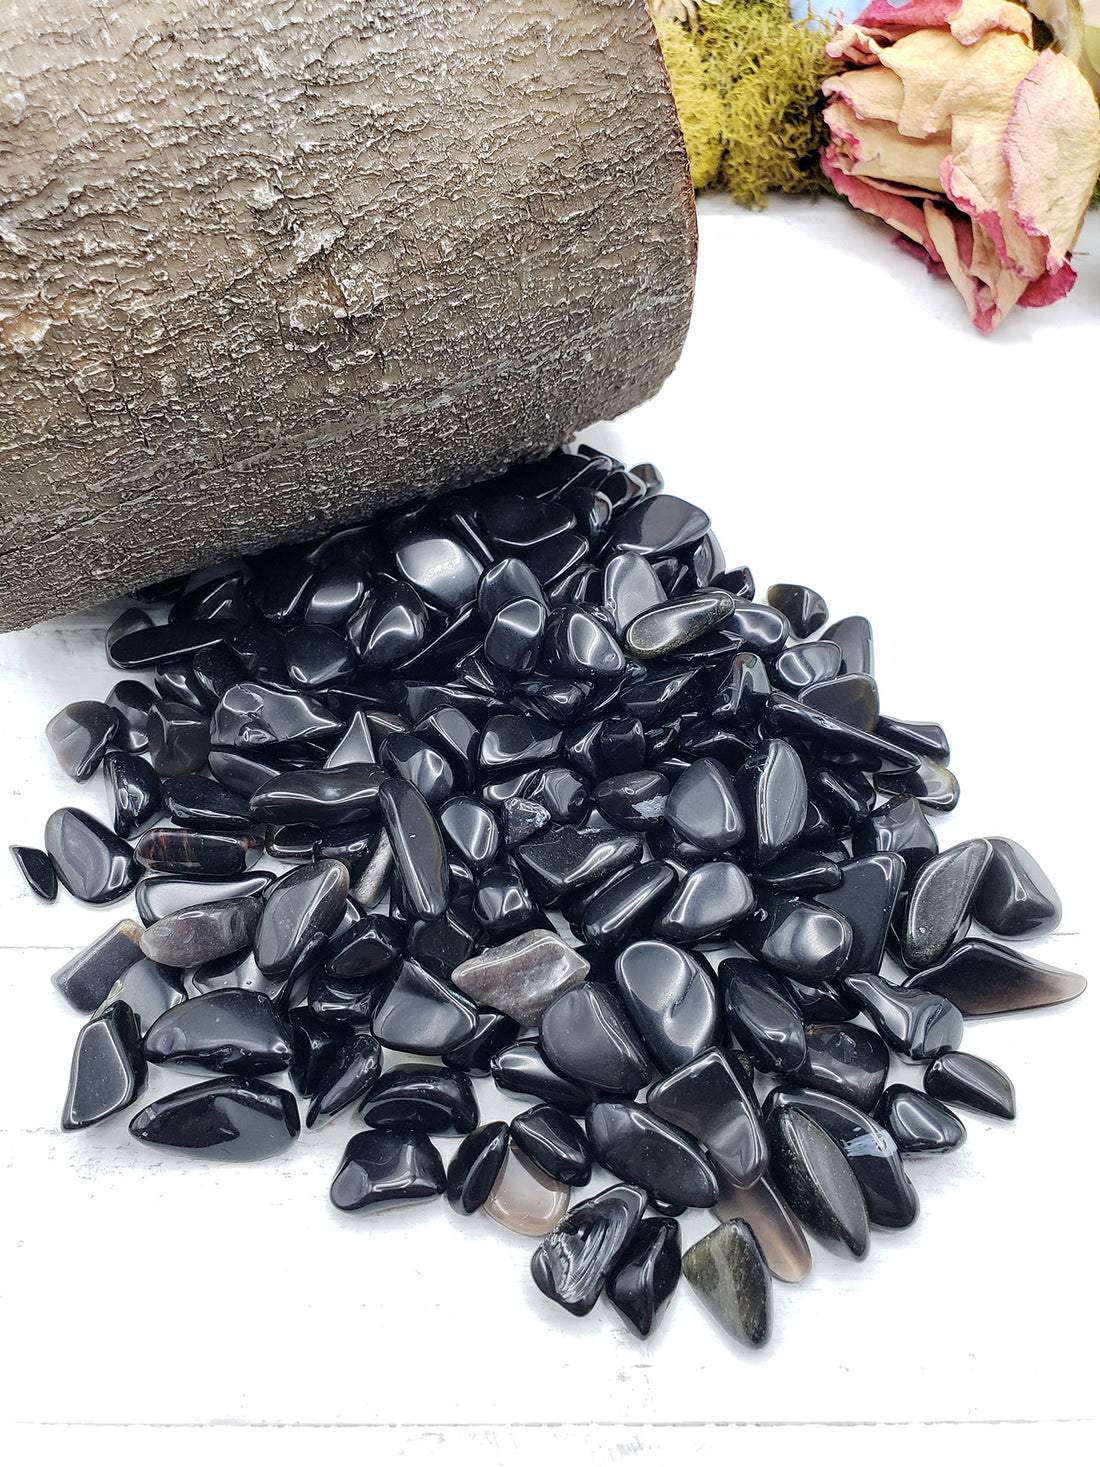 Five ounces of obsidian stone chips on display